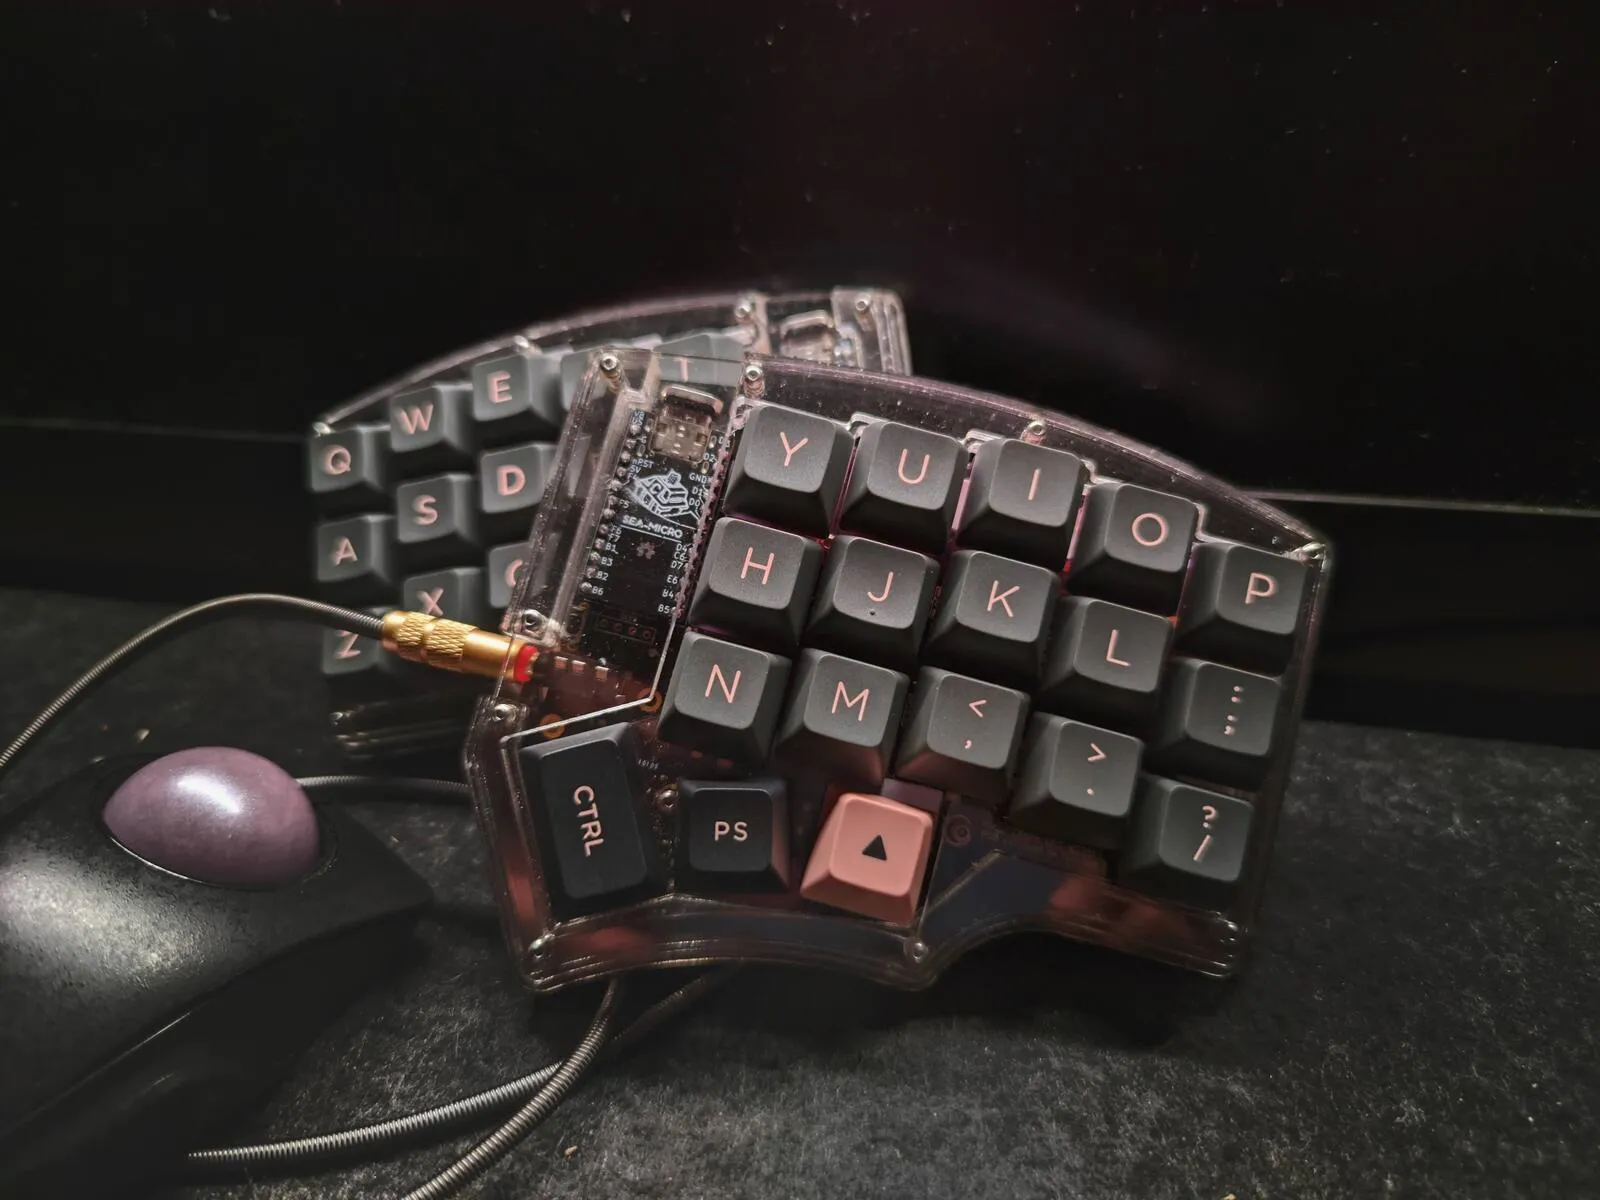 The right half of a Corne keyboard